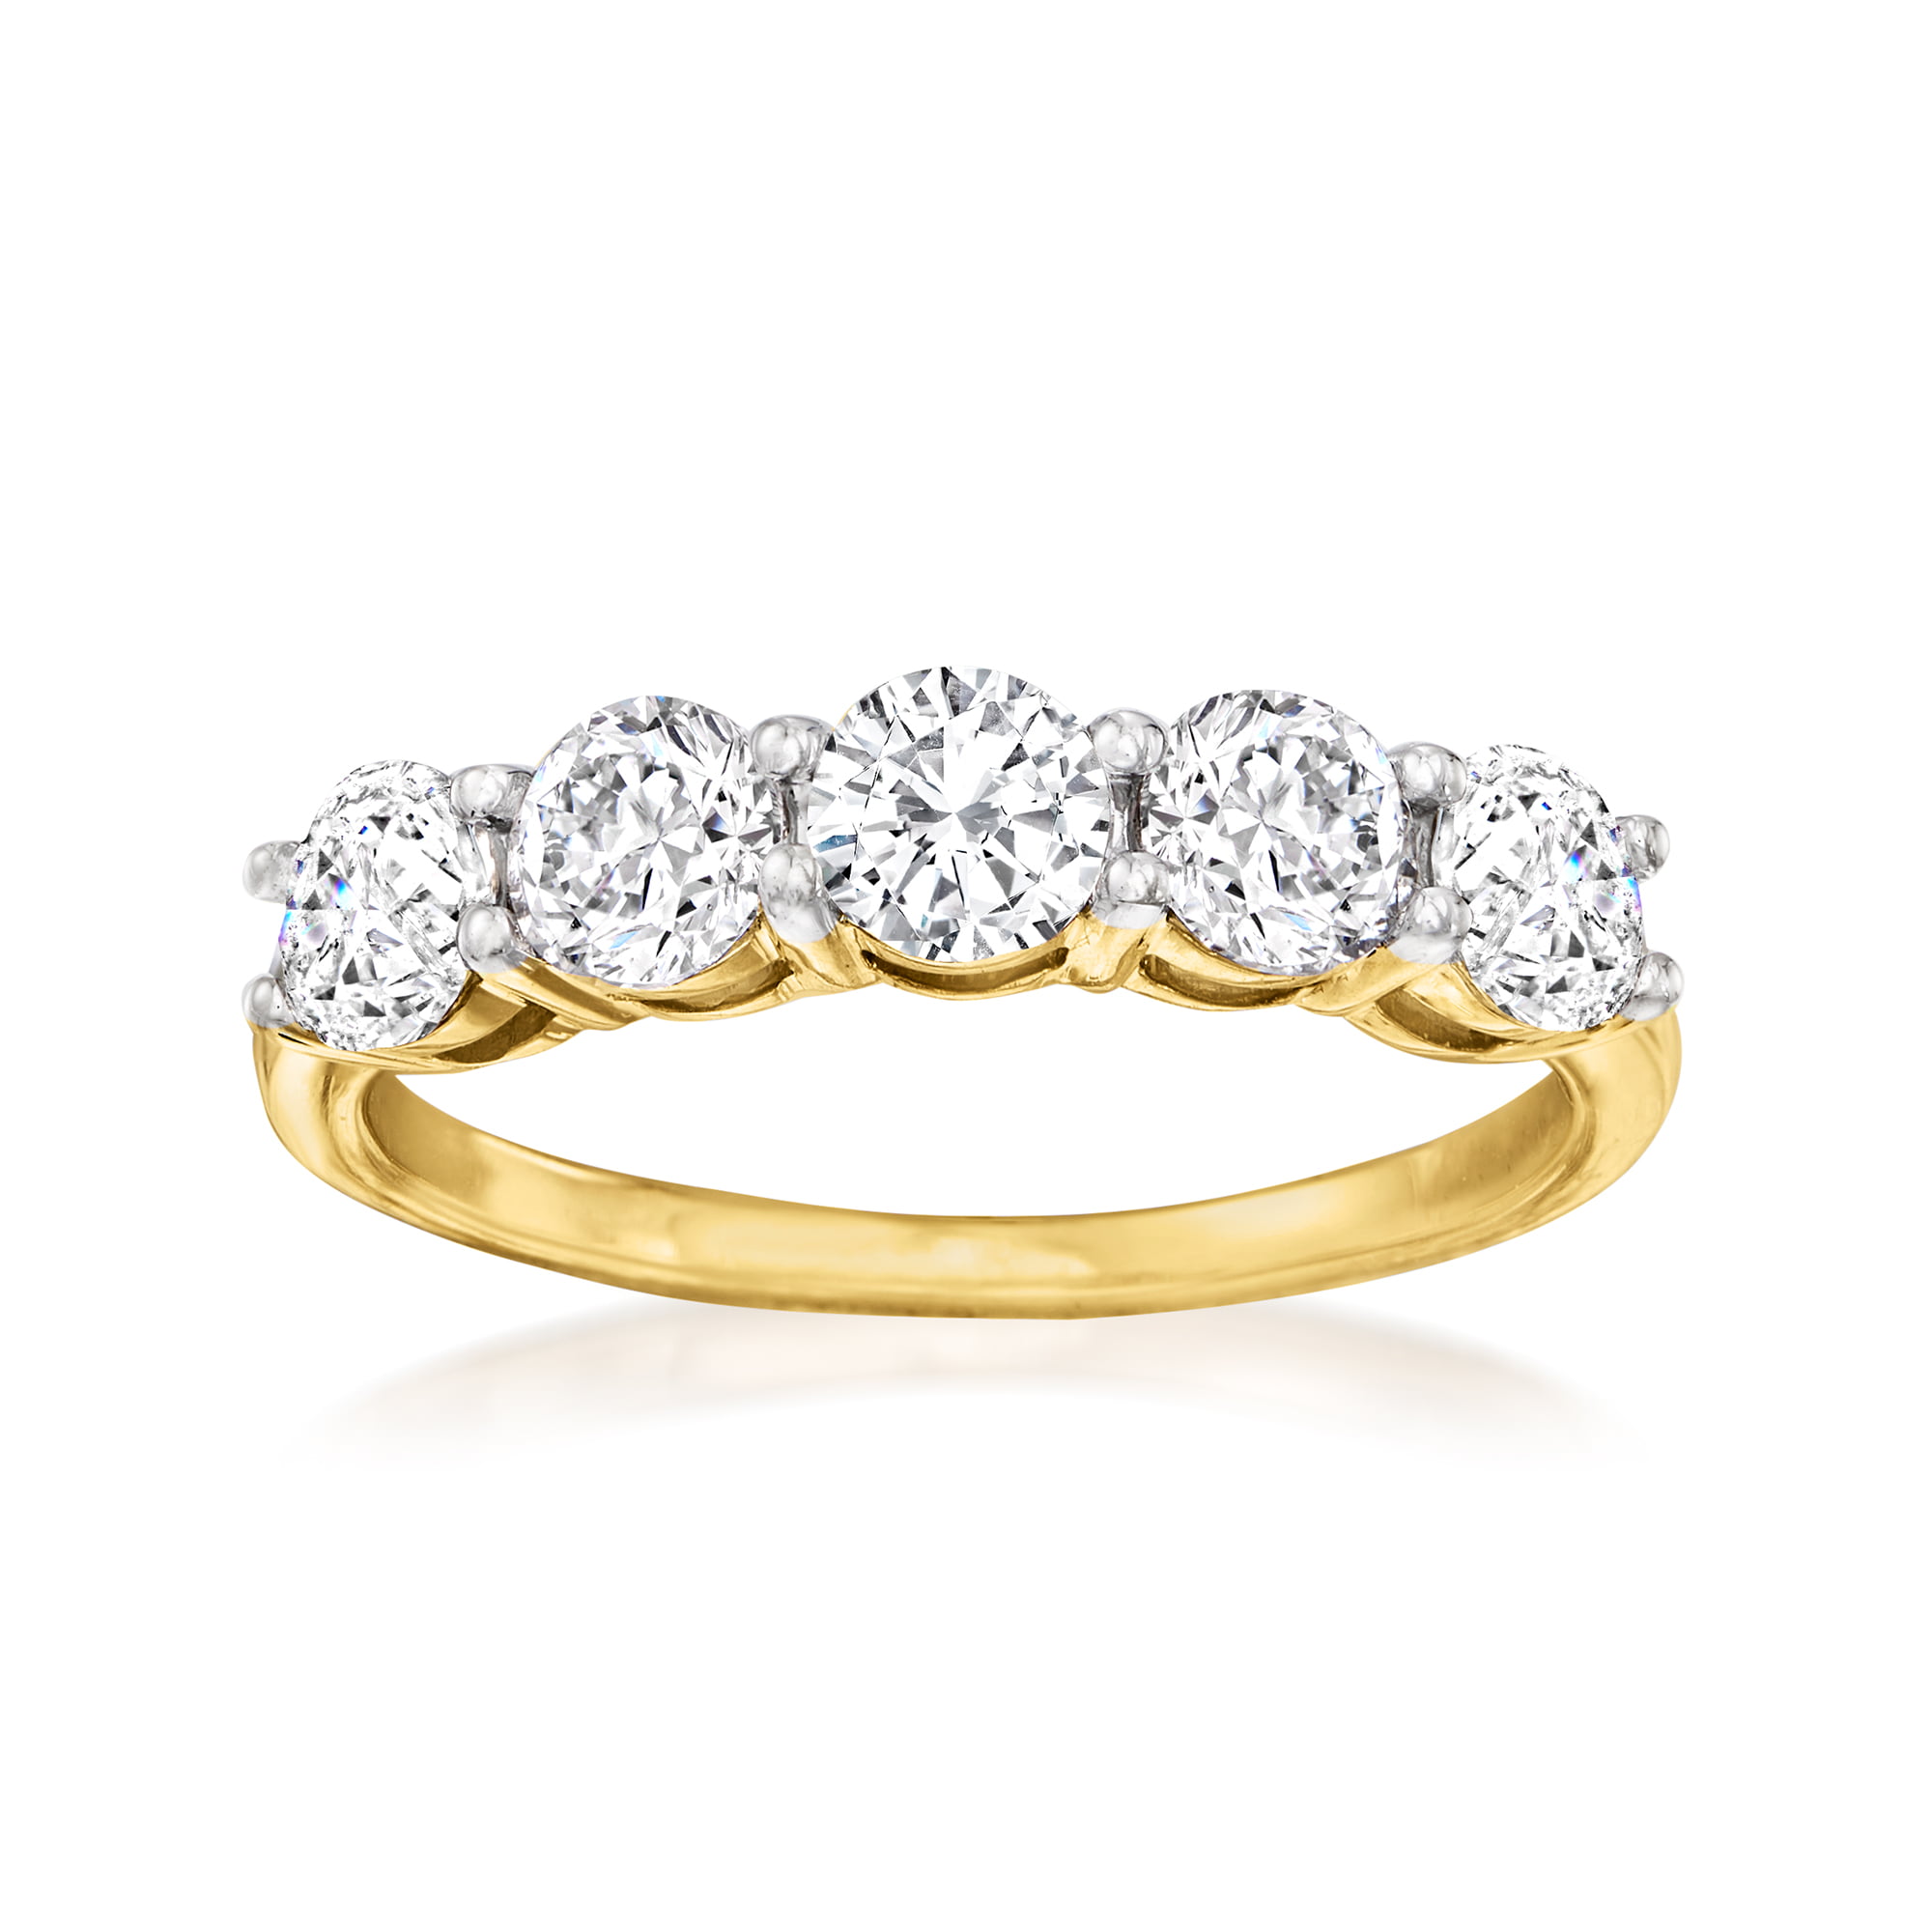 t.w Ross-Simons 1.50 ct Diamond Eternity Band in 14kt Yellow Gold